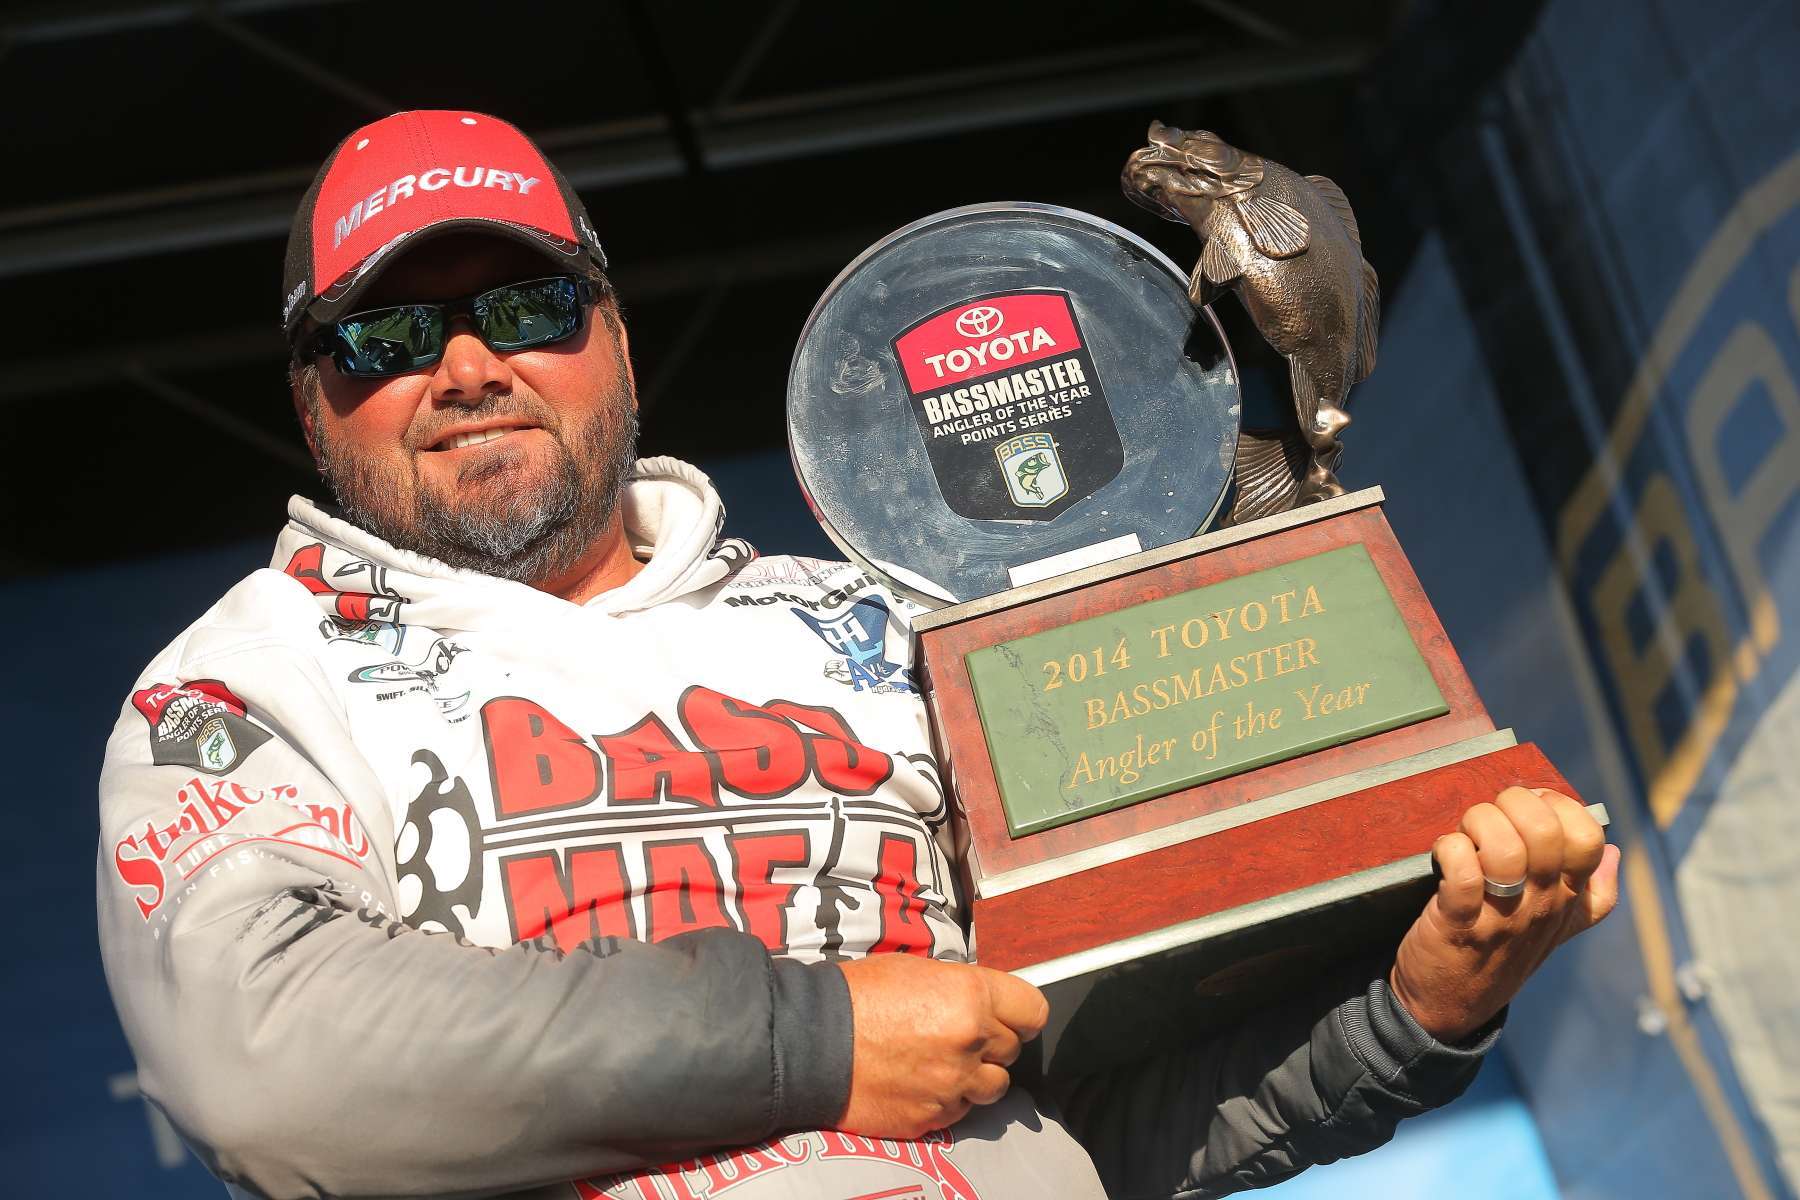 <b>Possible: Hackney completes the Grand Slam</b></p>
<p>Six anglers have won three-fourths of pro bass fishingâs âGrand Slamâ â Toyota Bassmaster Angler of the Year, Bassmaster Classic champion, FLW Angler of the Year and FLW Wood Cup champion. Greg Hackney has a chance to be the first to complete the slam. He just needs to win the Classic.
